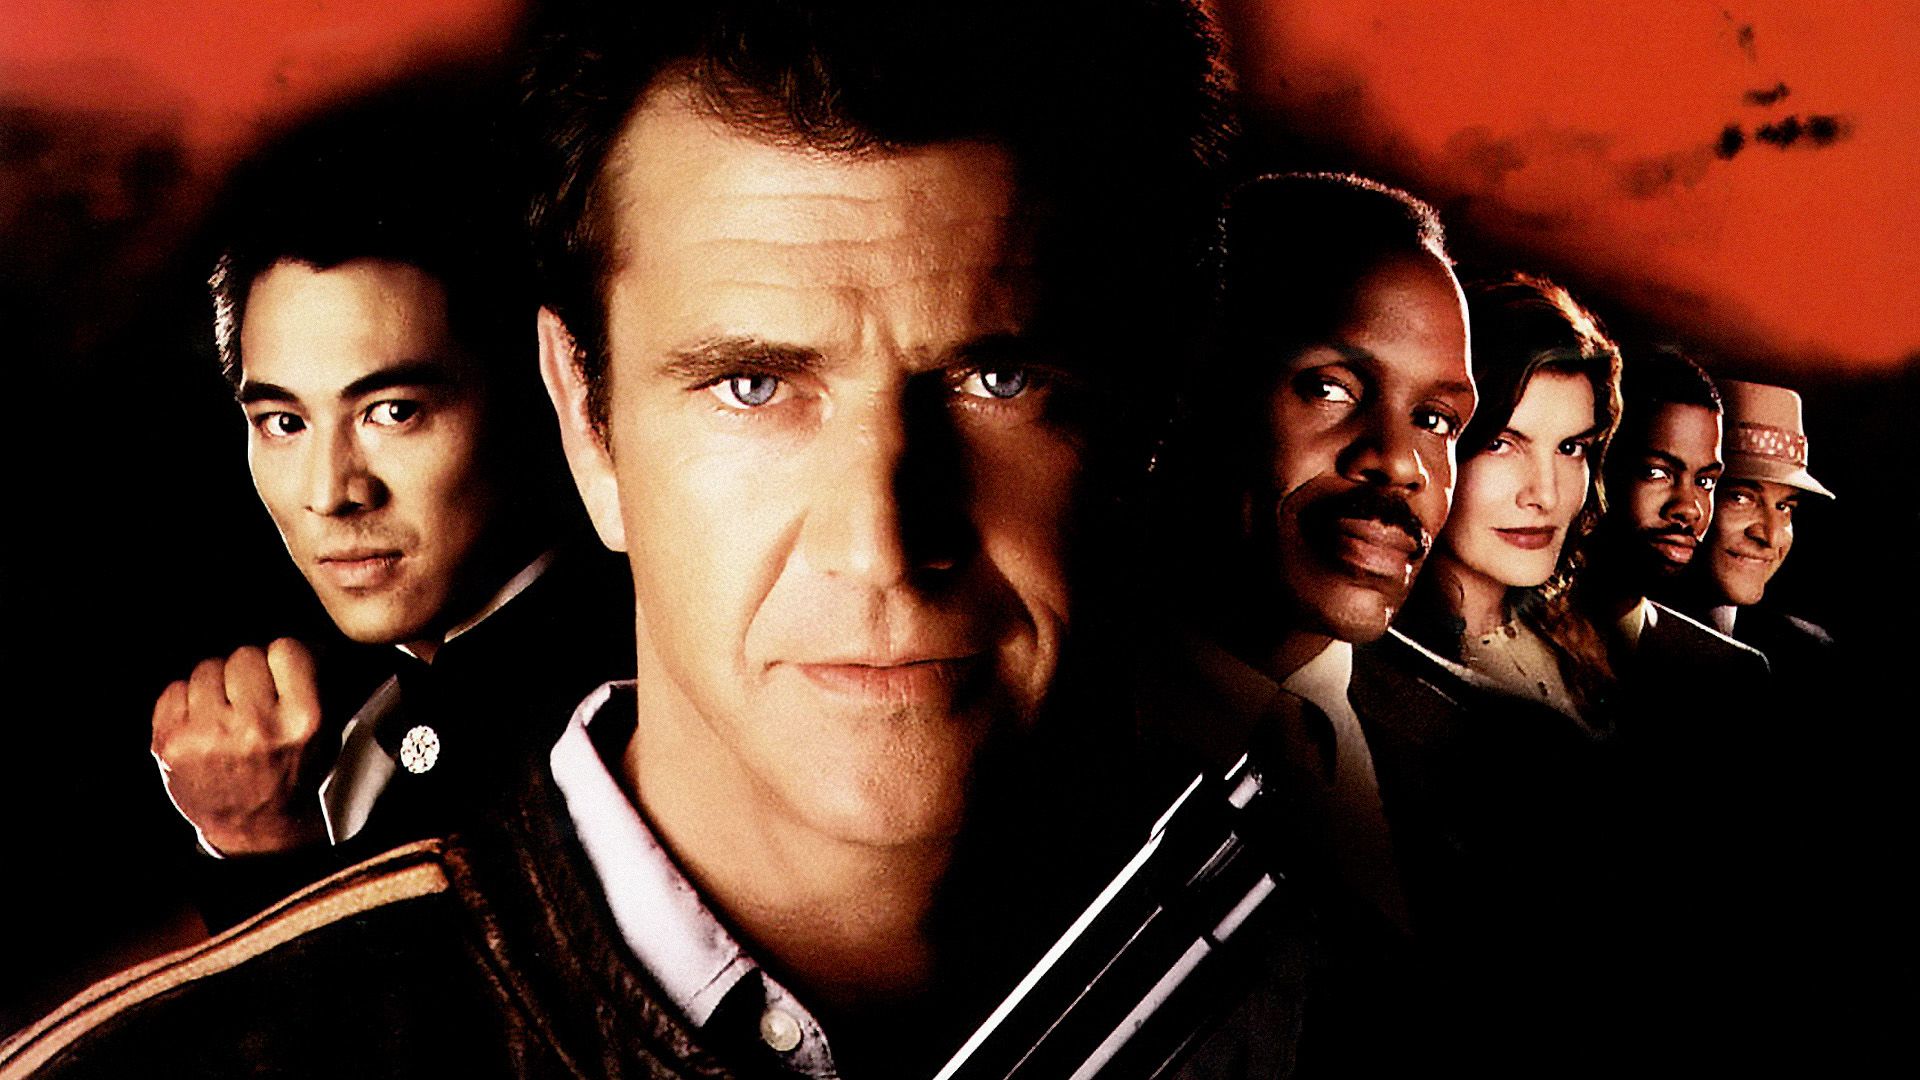 Lethal Weapon 4 background